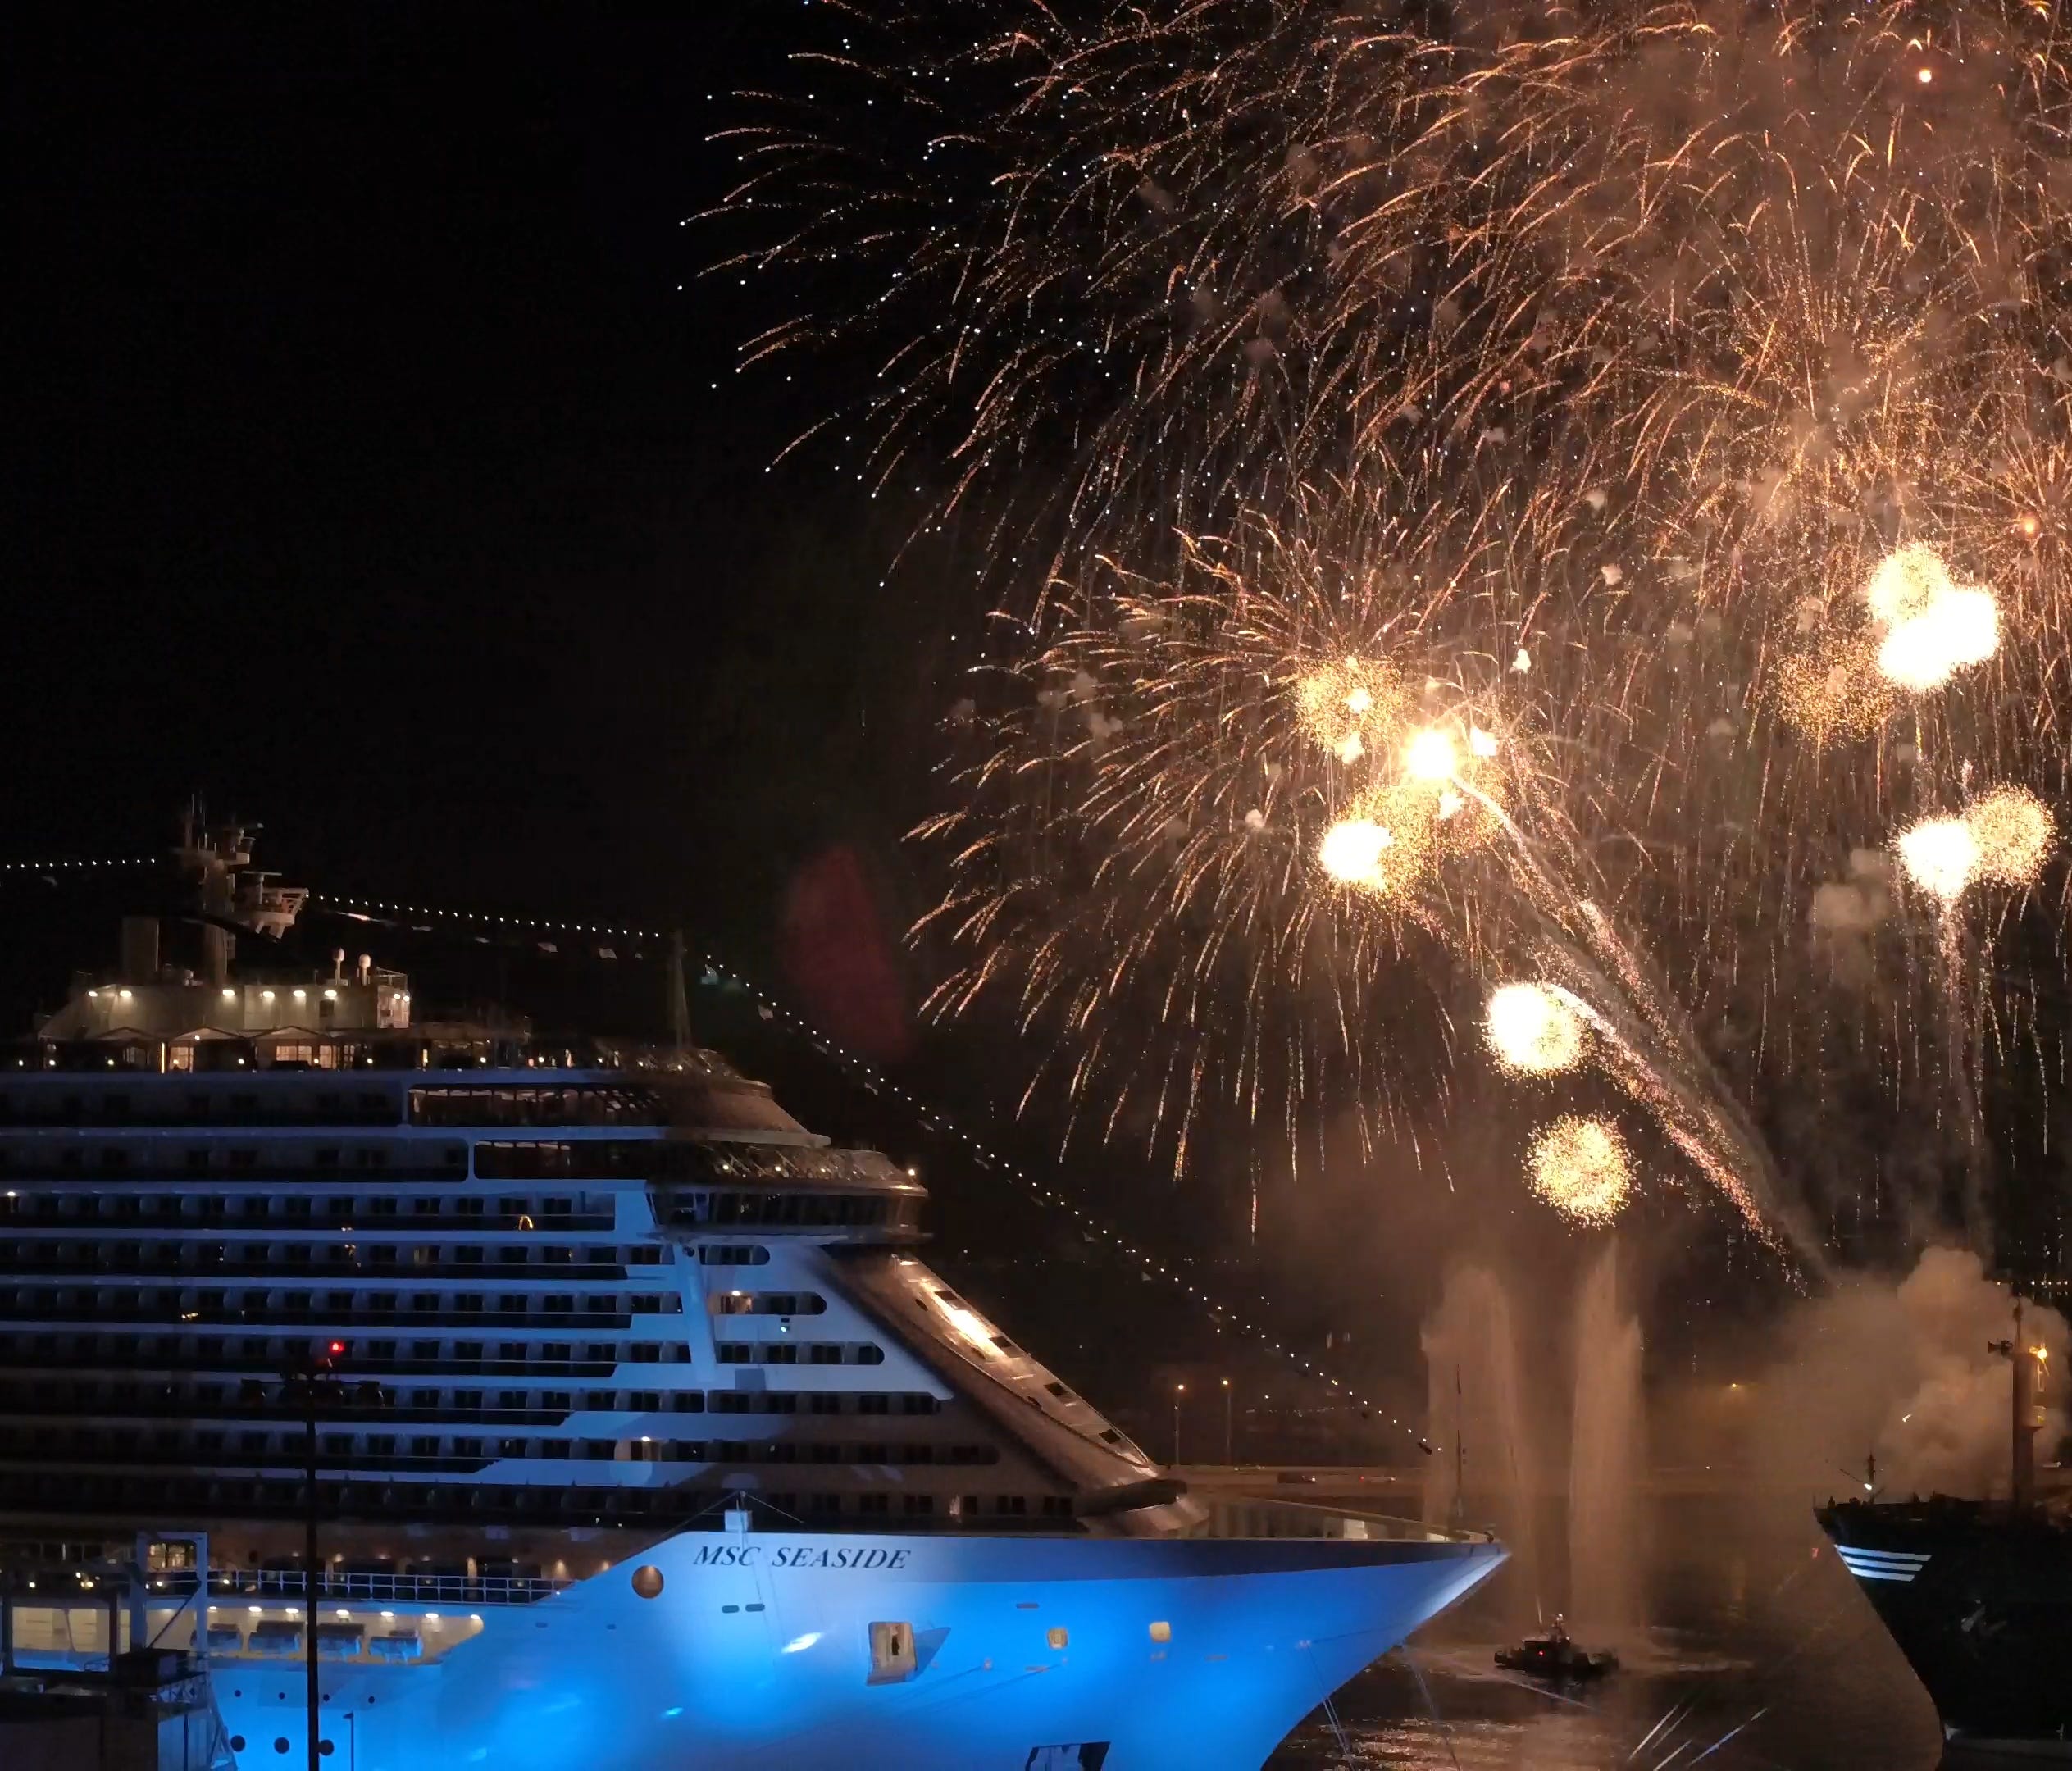 The MSC Seaside is christened in Miami.